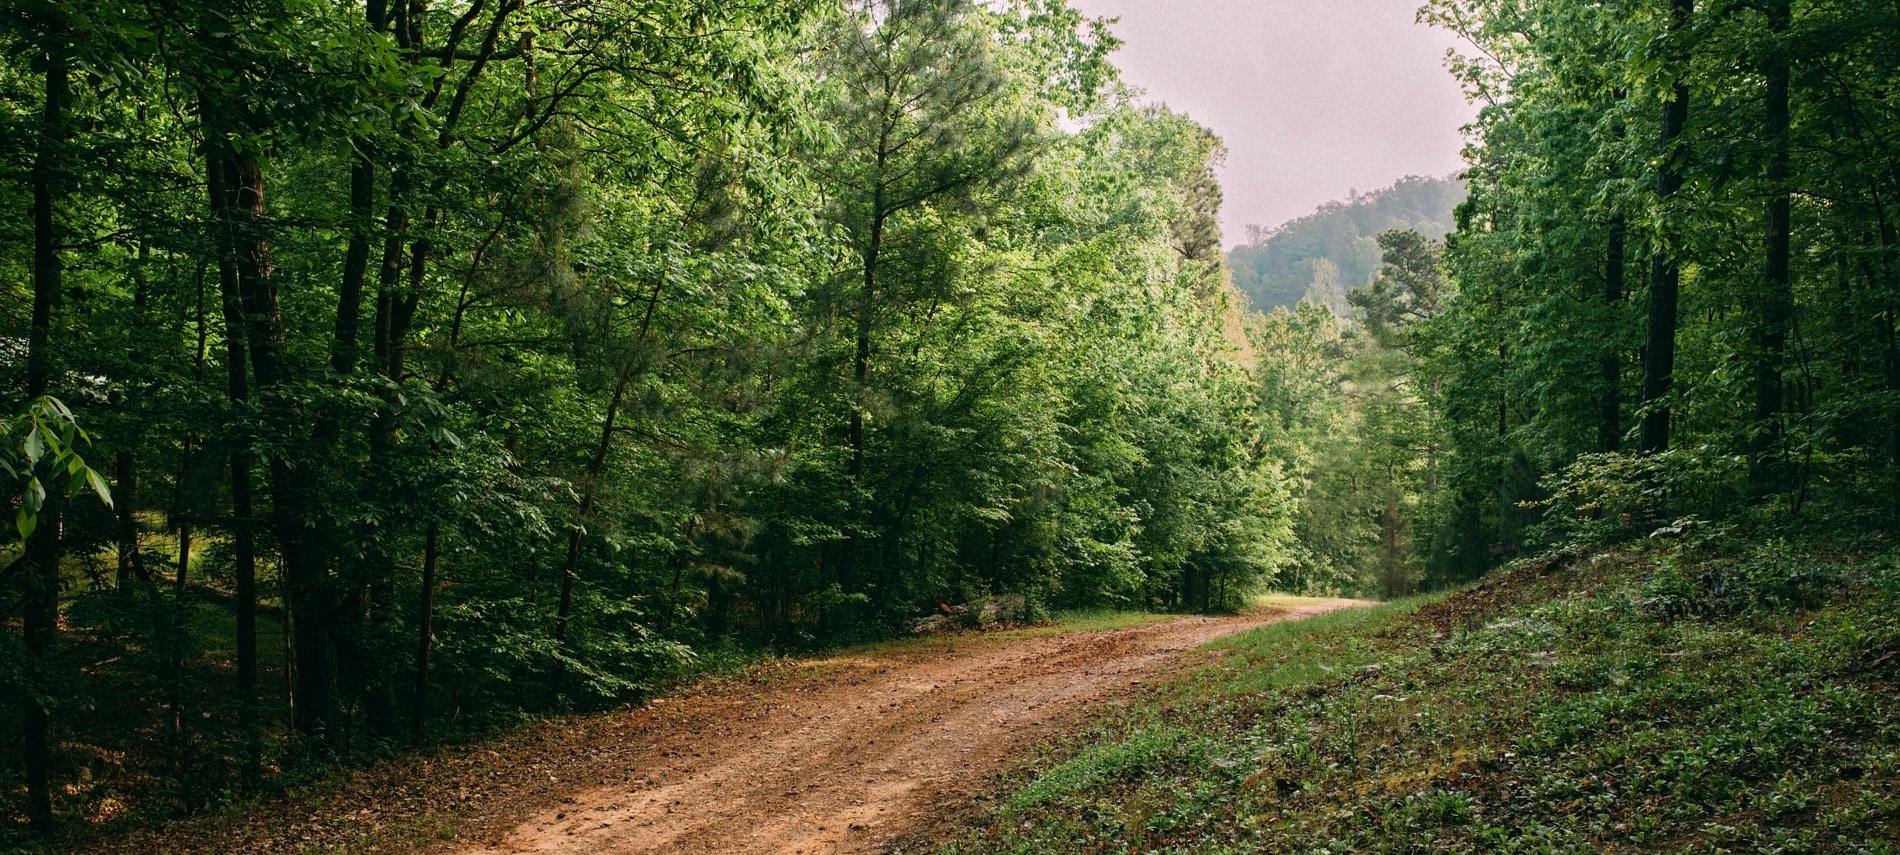 Winding and rolling dirt road surrounded by tall lush green trees